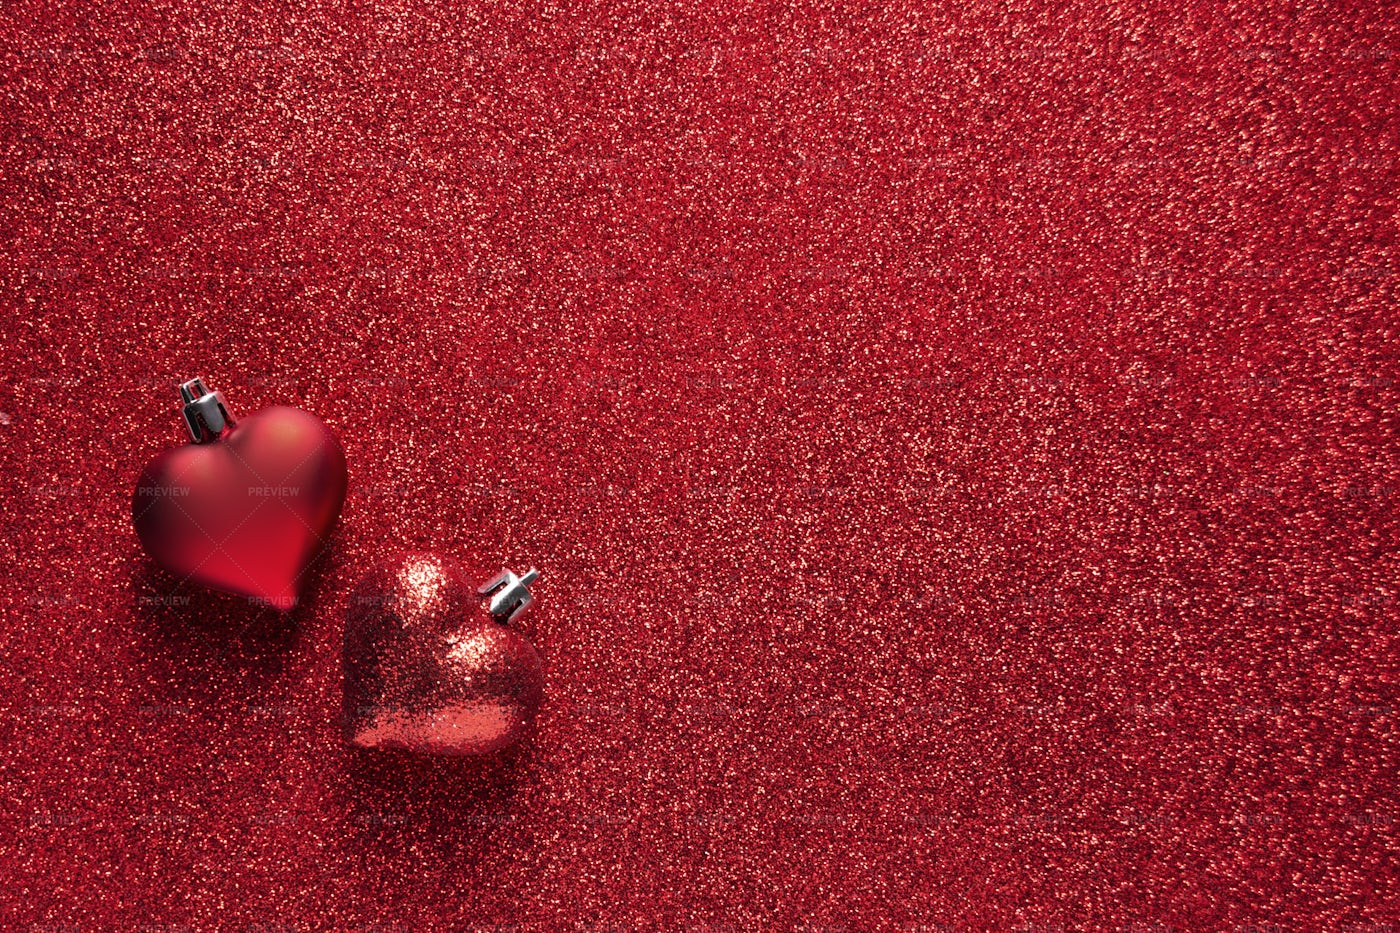 Heart Shaped Toys On Red: Stock Photos